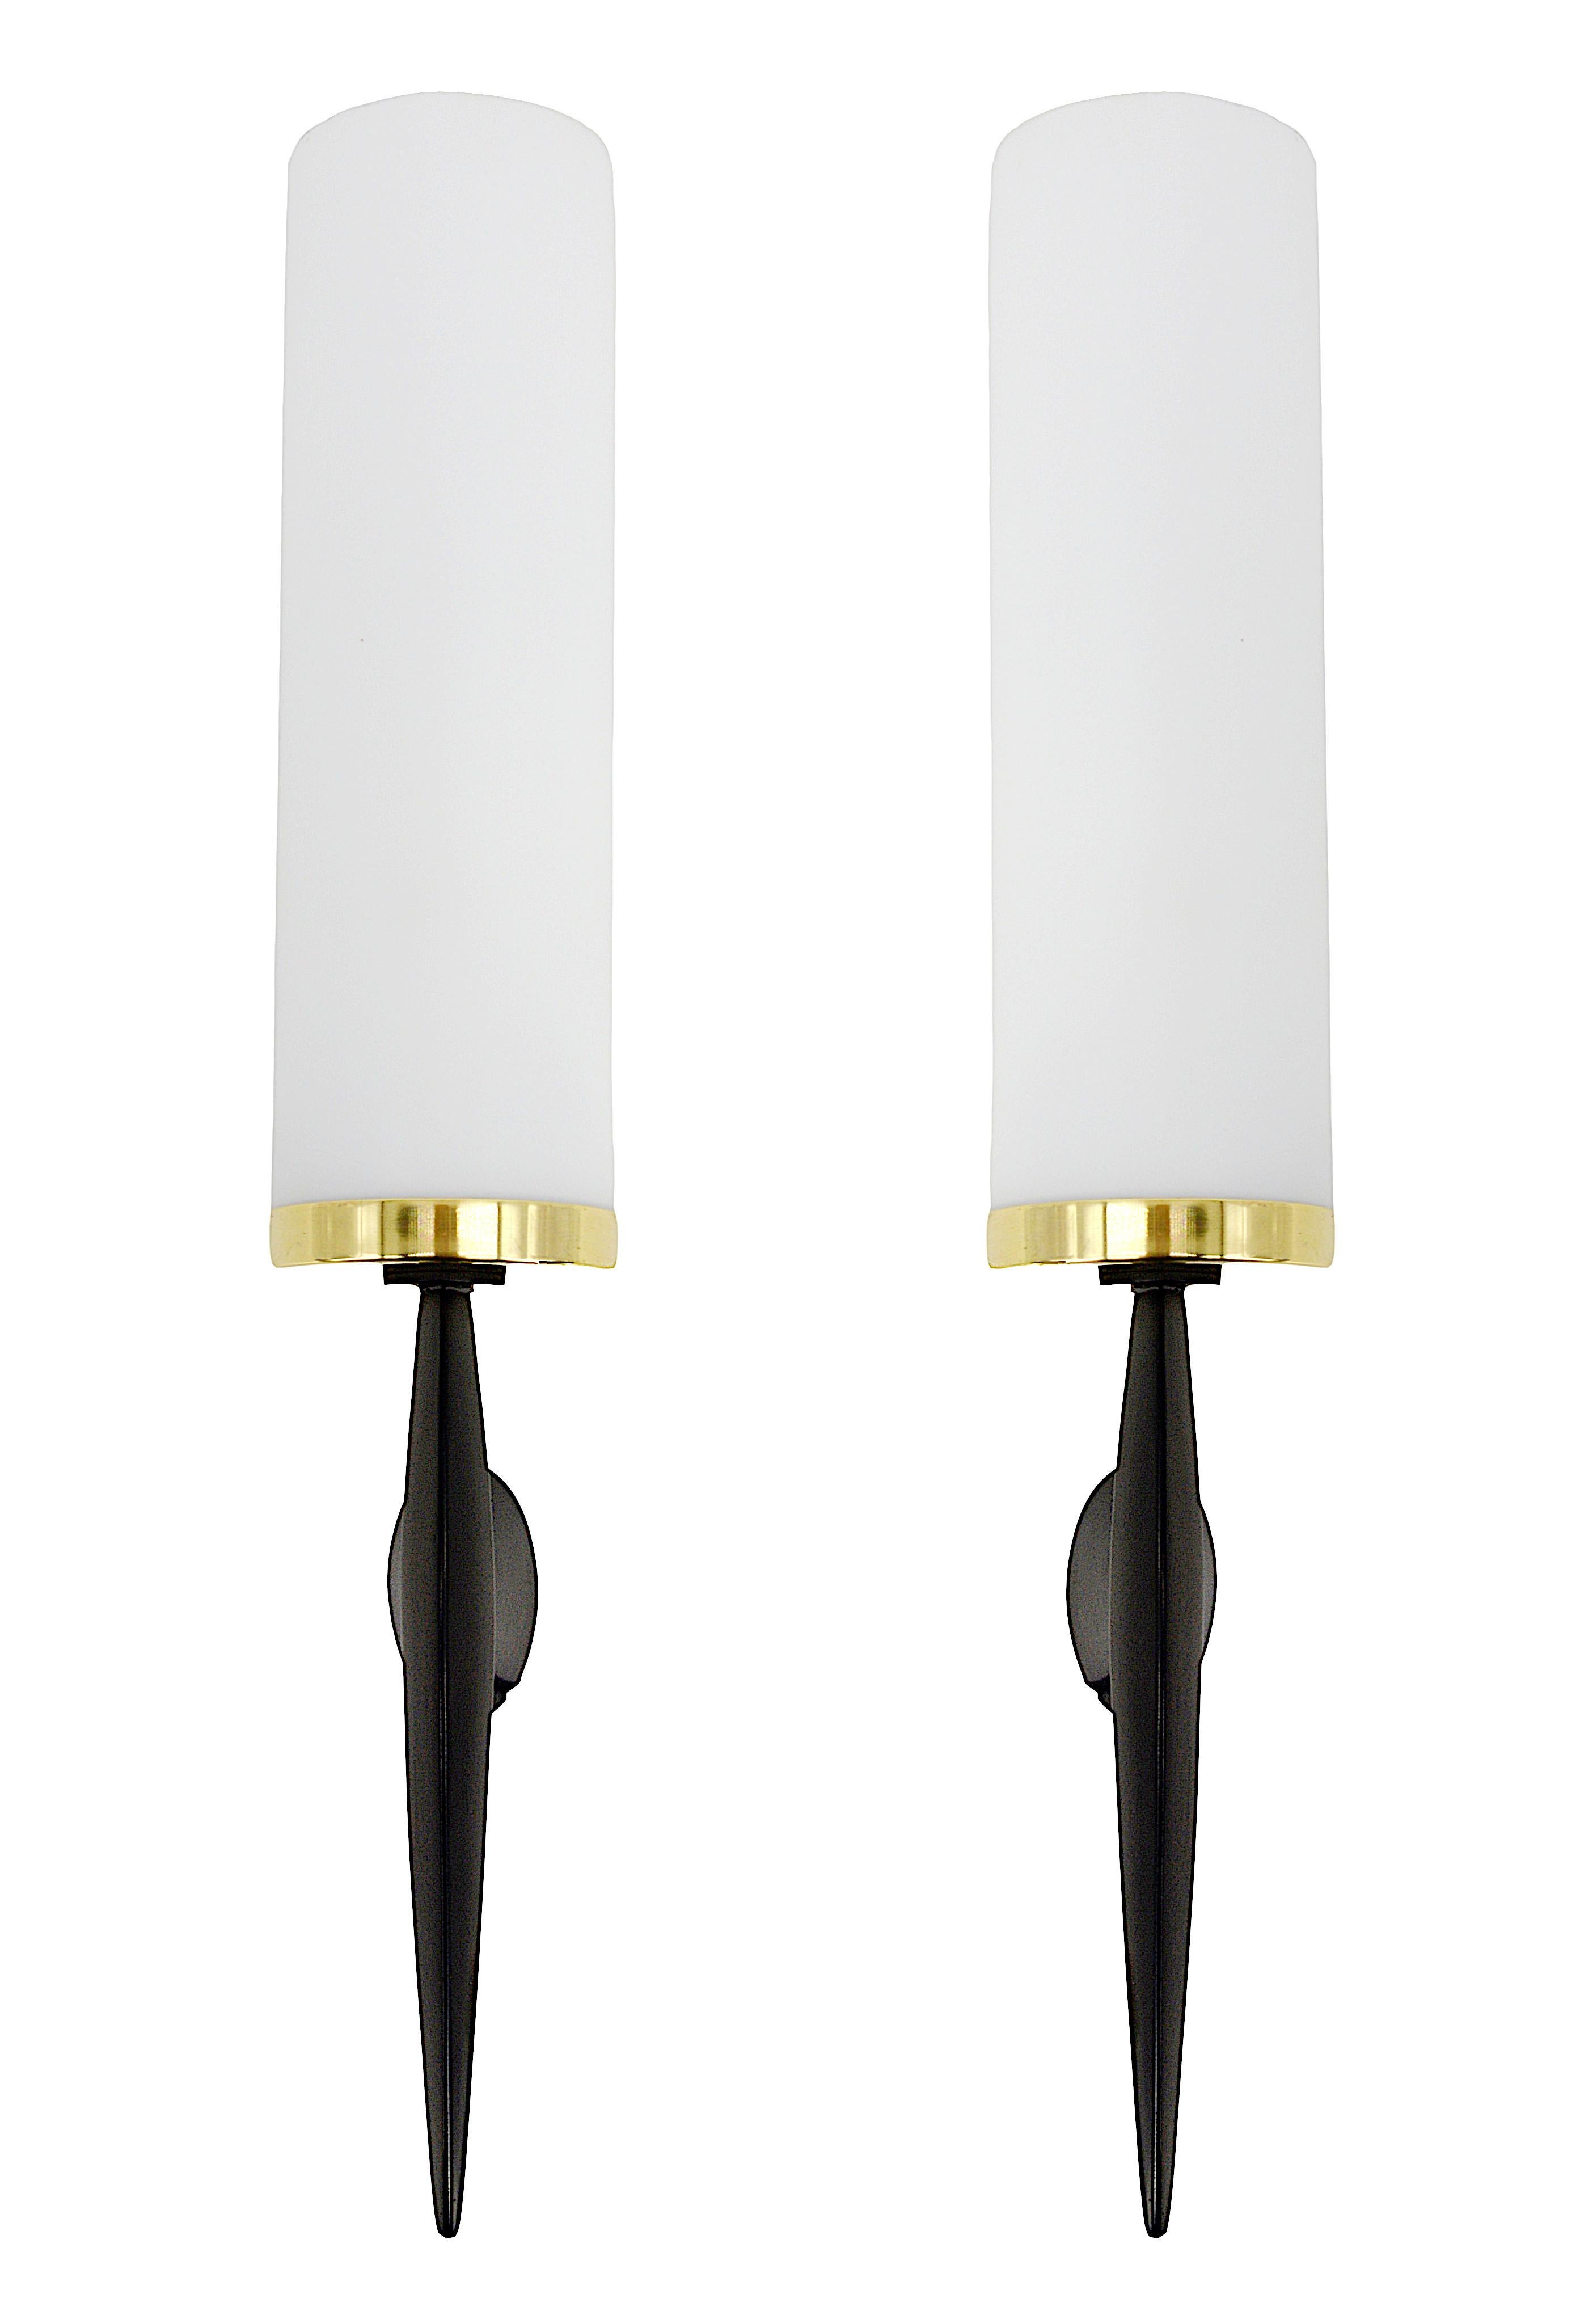 Pair of midcentury wall sconces by Arlus (Paris), France, 1950s. Measures: height 14.4